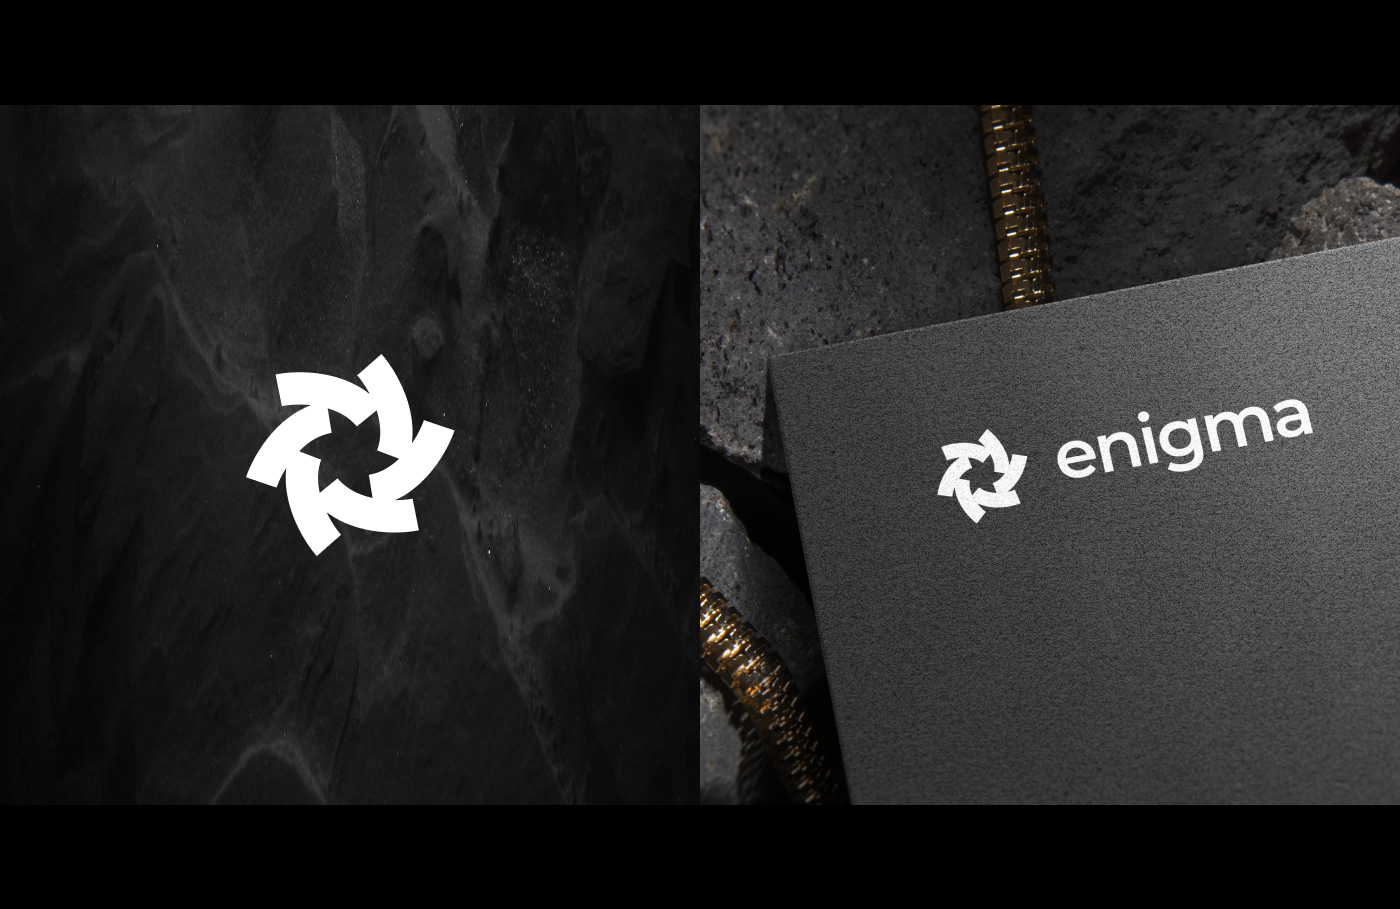 photos with the enigma logo on a background of black sand and printing on paper